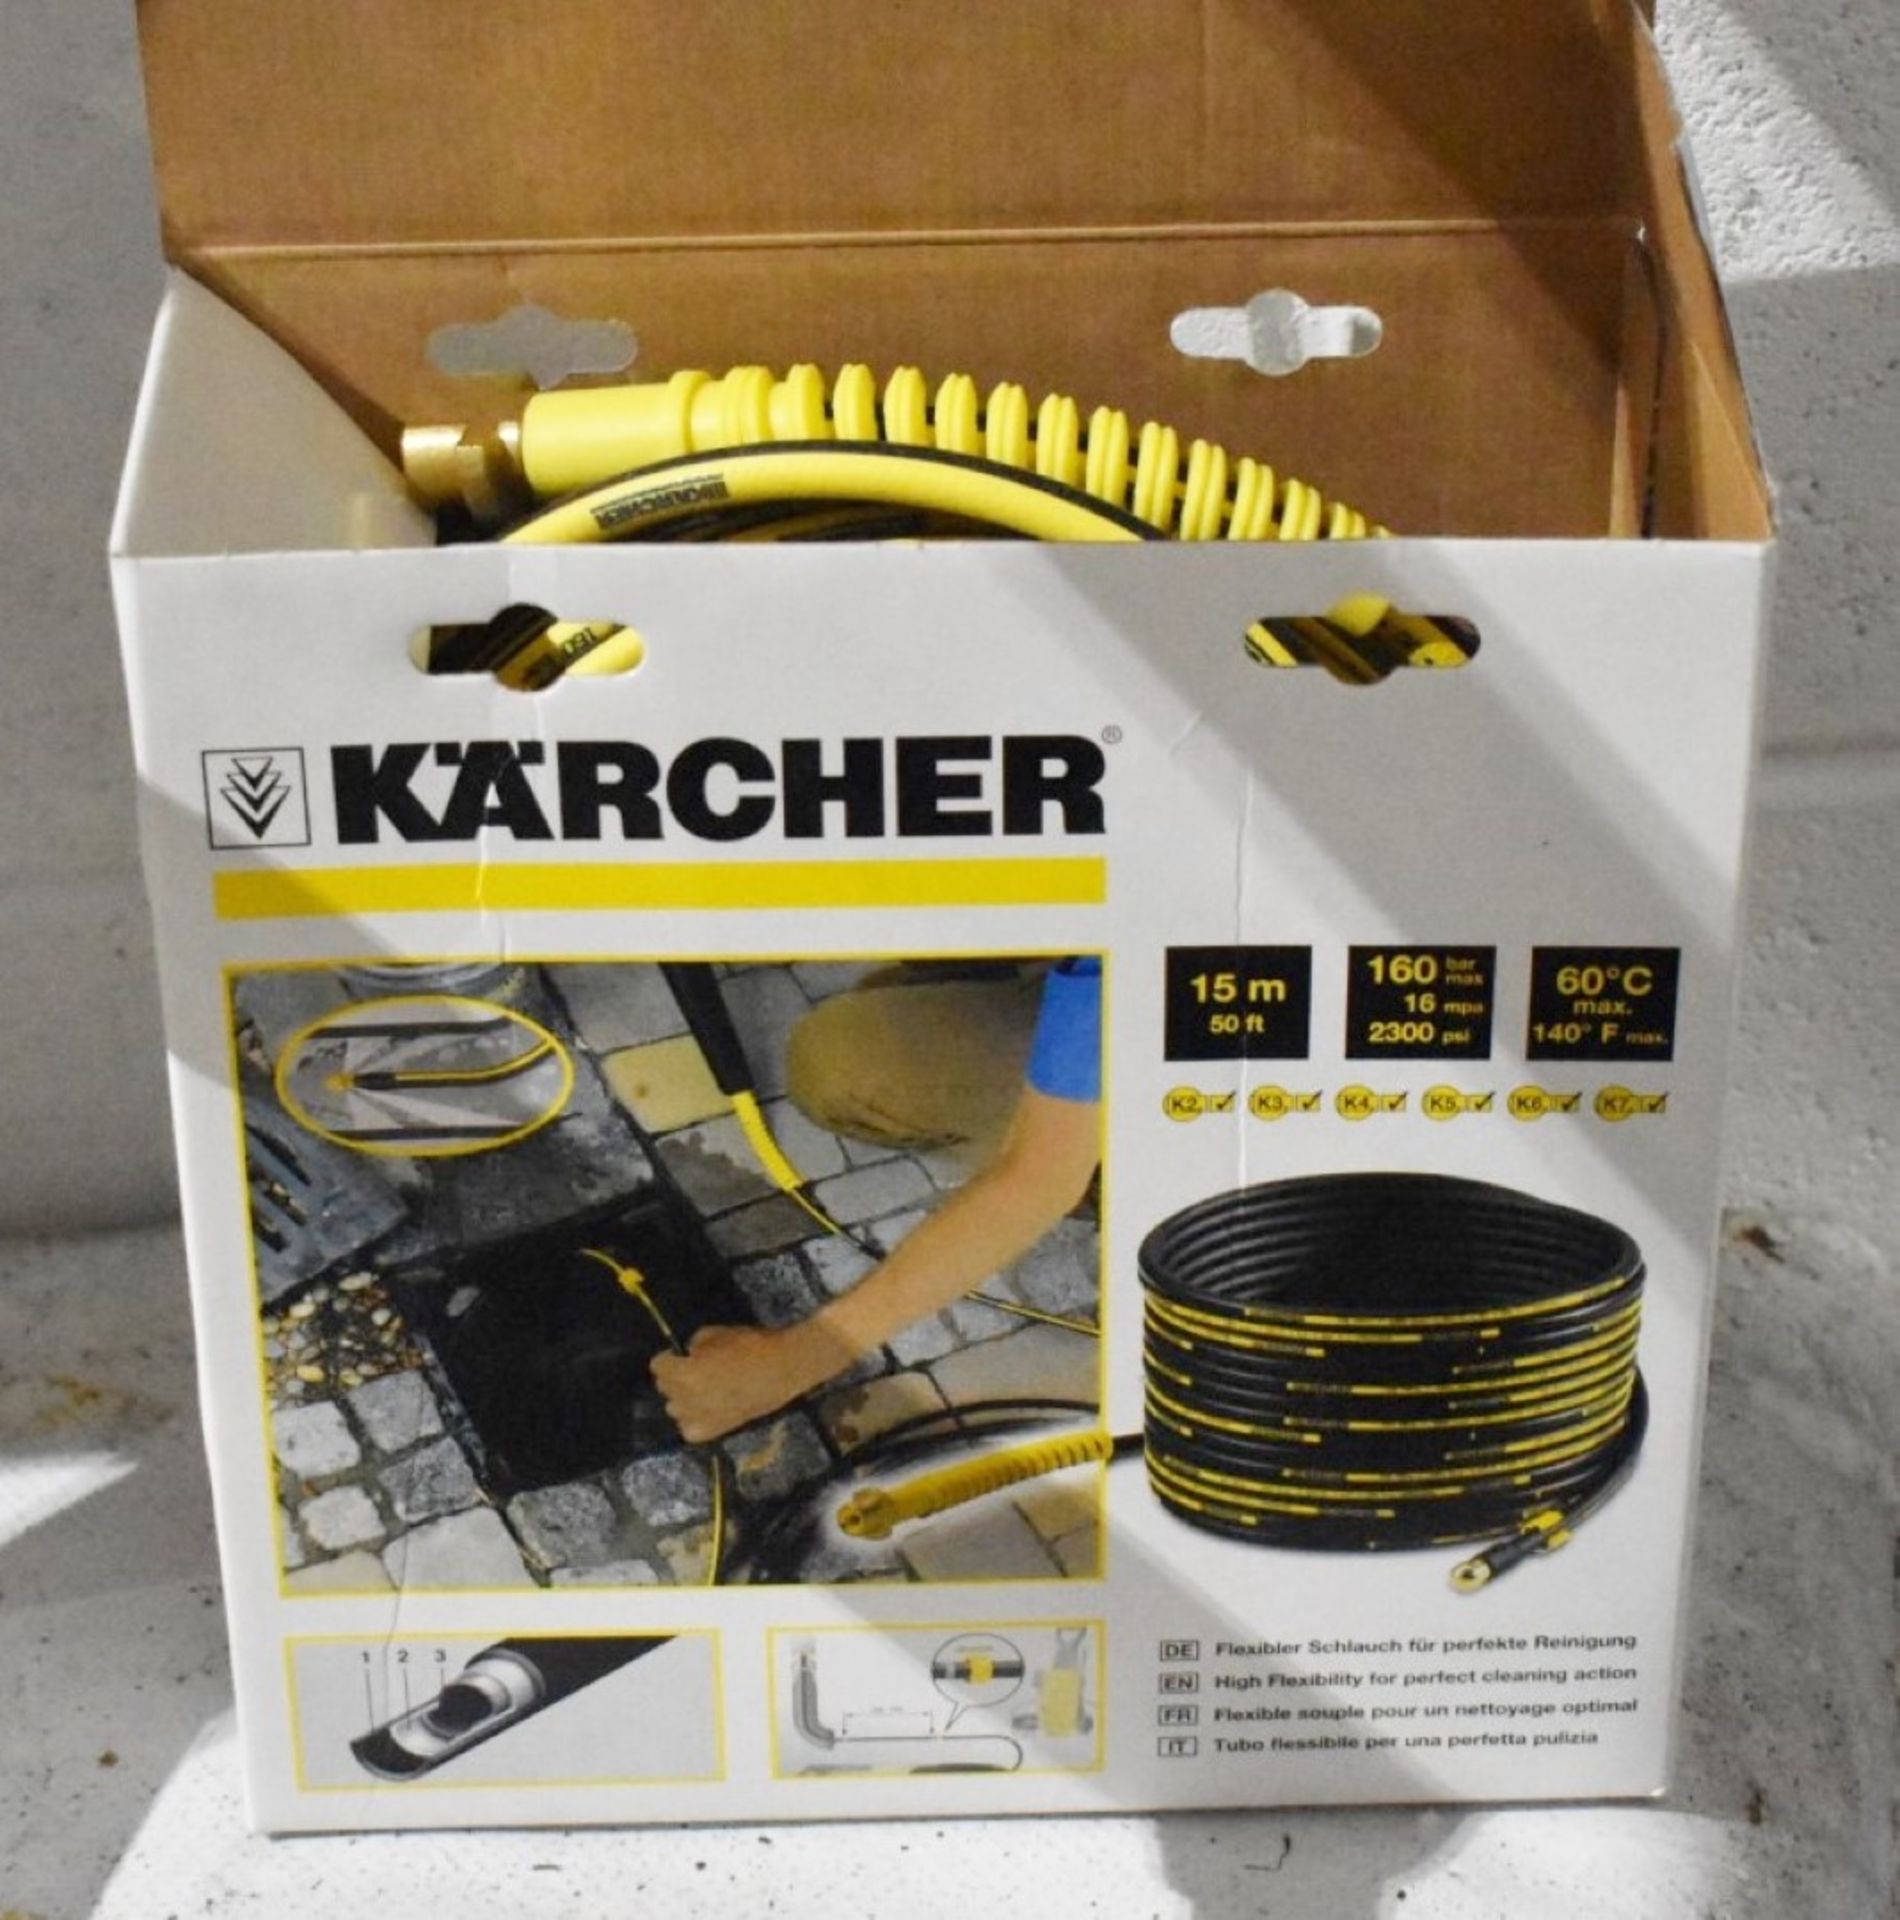 1 x Karcher K3 Pressure Washer With Accessories SRB137 - Image 5 of 6